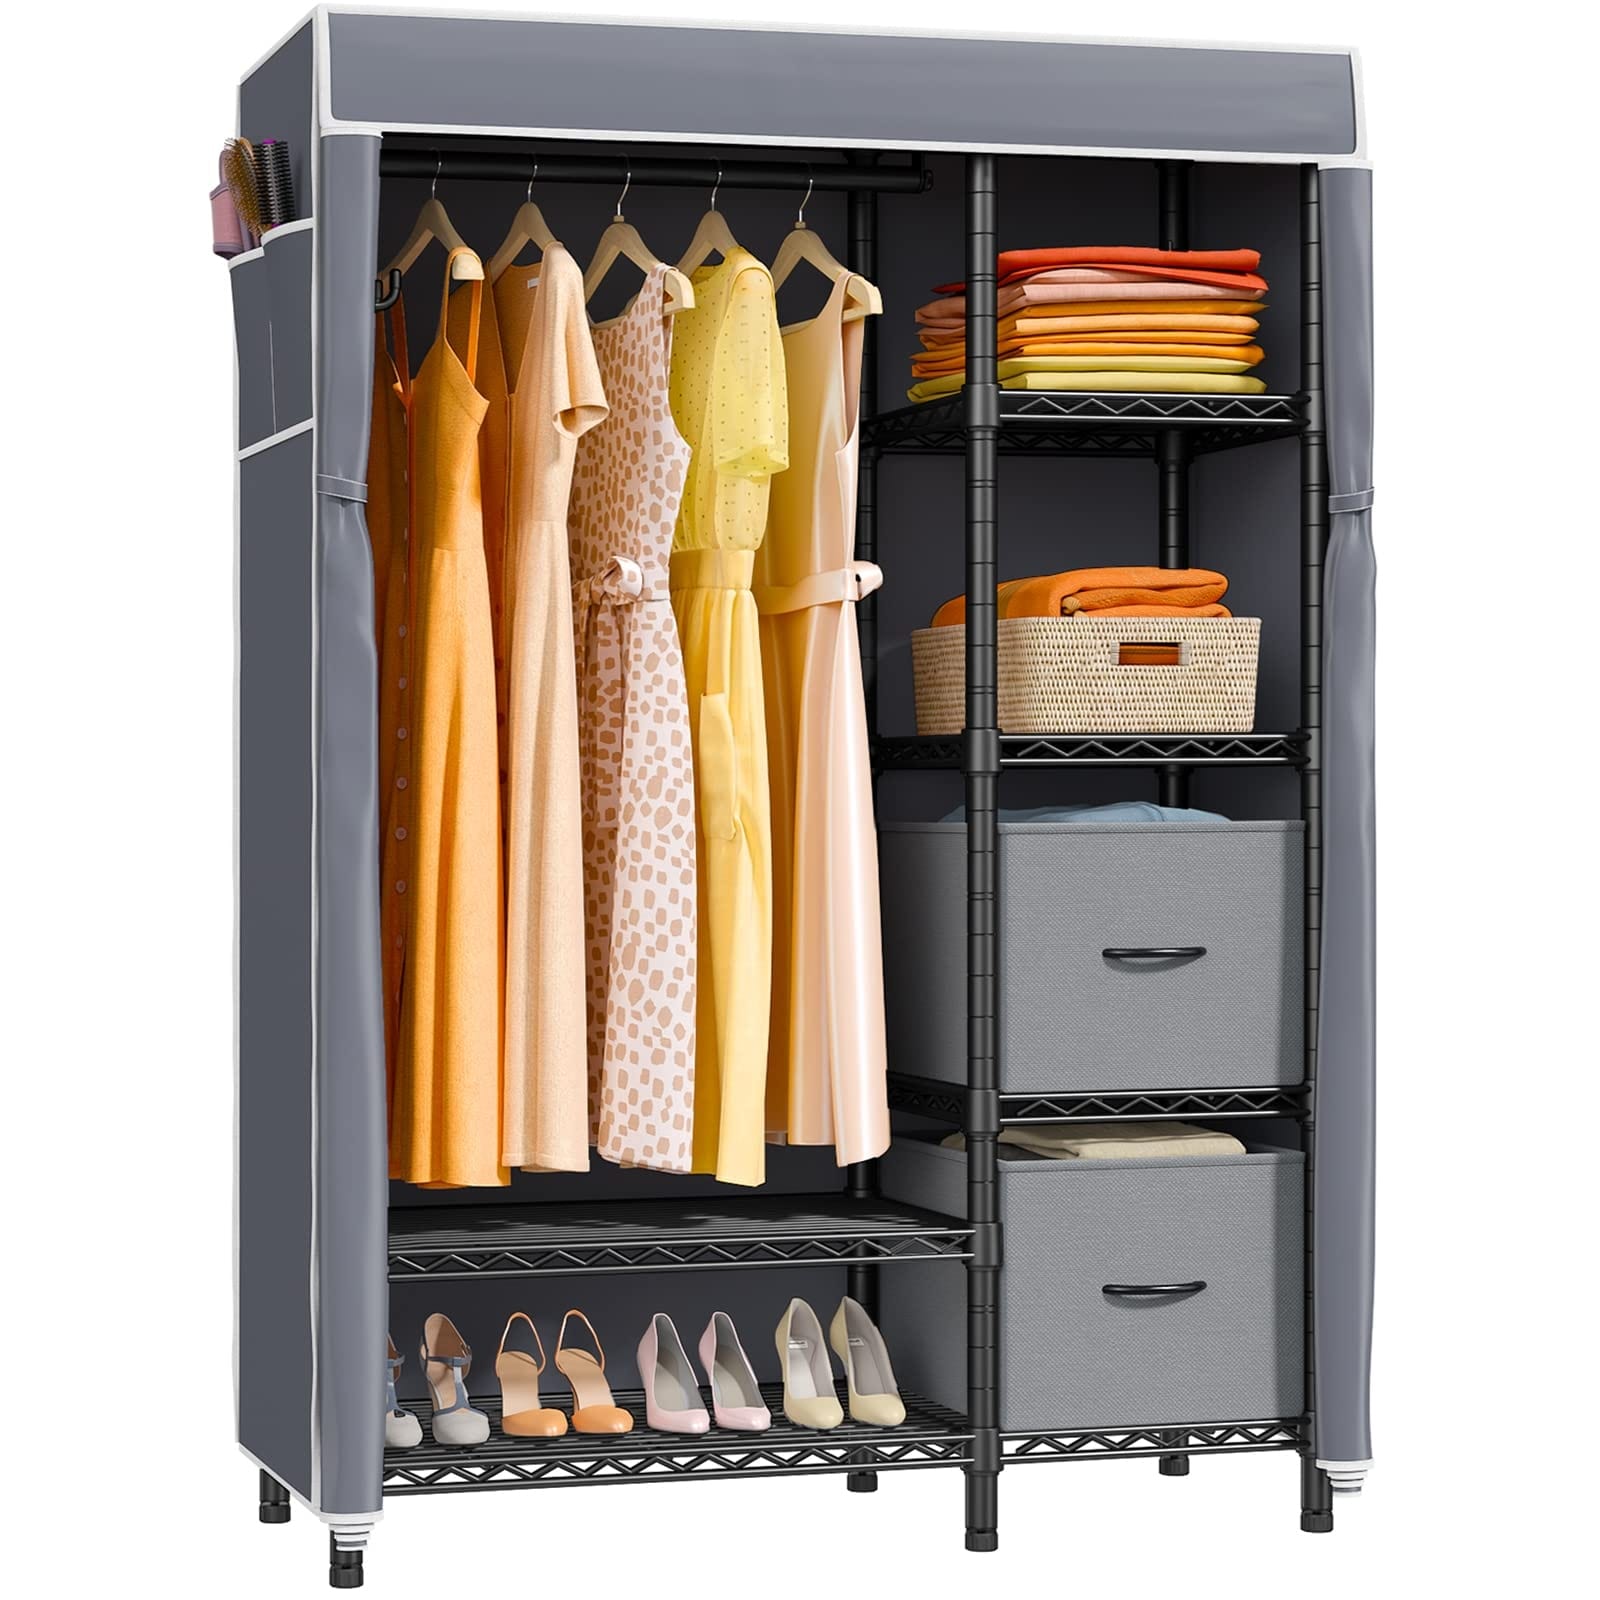 https://ak1.ostkcdn.com/images/products/is/images/direct/912de57e9135c5a9a6bf5bf657582028d13ac62d/Wire-Garment-Rack-6-Tiers-Heavy-Duty-Covered-Clothes-Rack-with-2-Fabric-Drawers%2C-Freestanding-Wardrobe-Closet.jpg